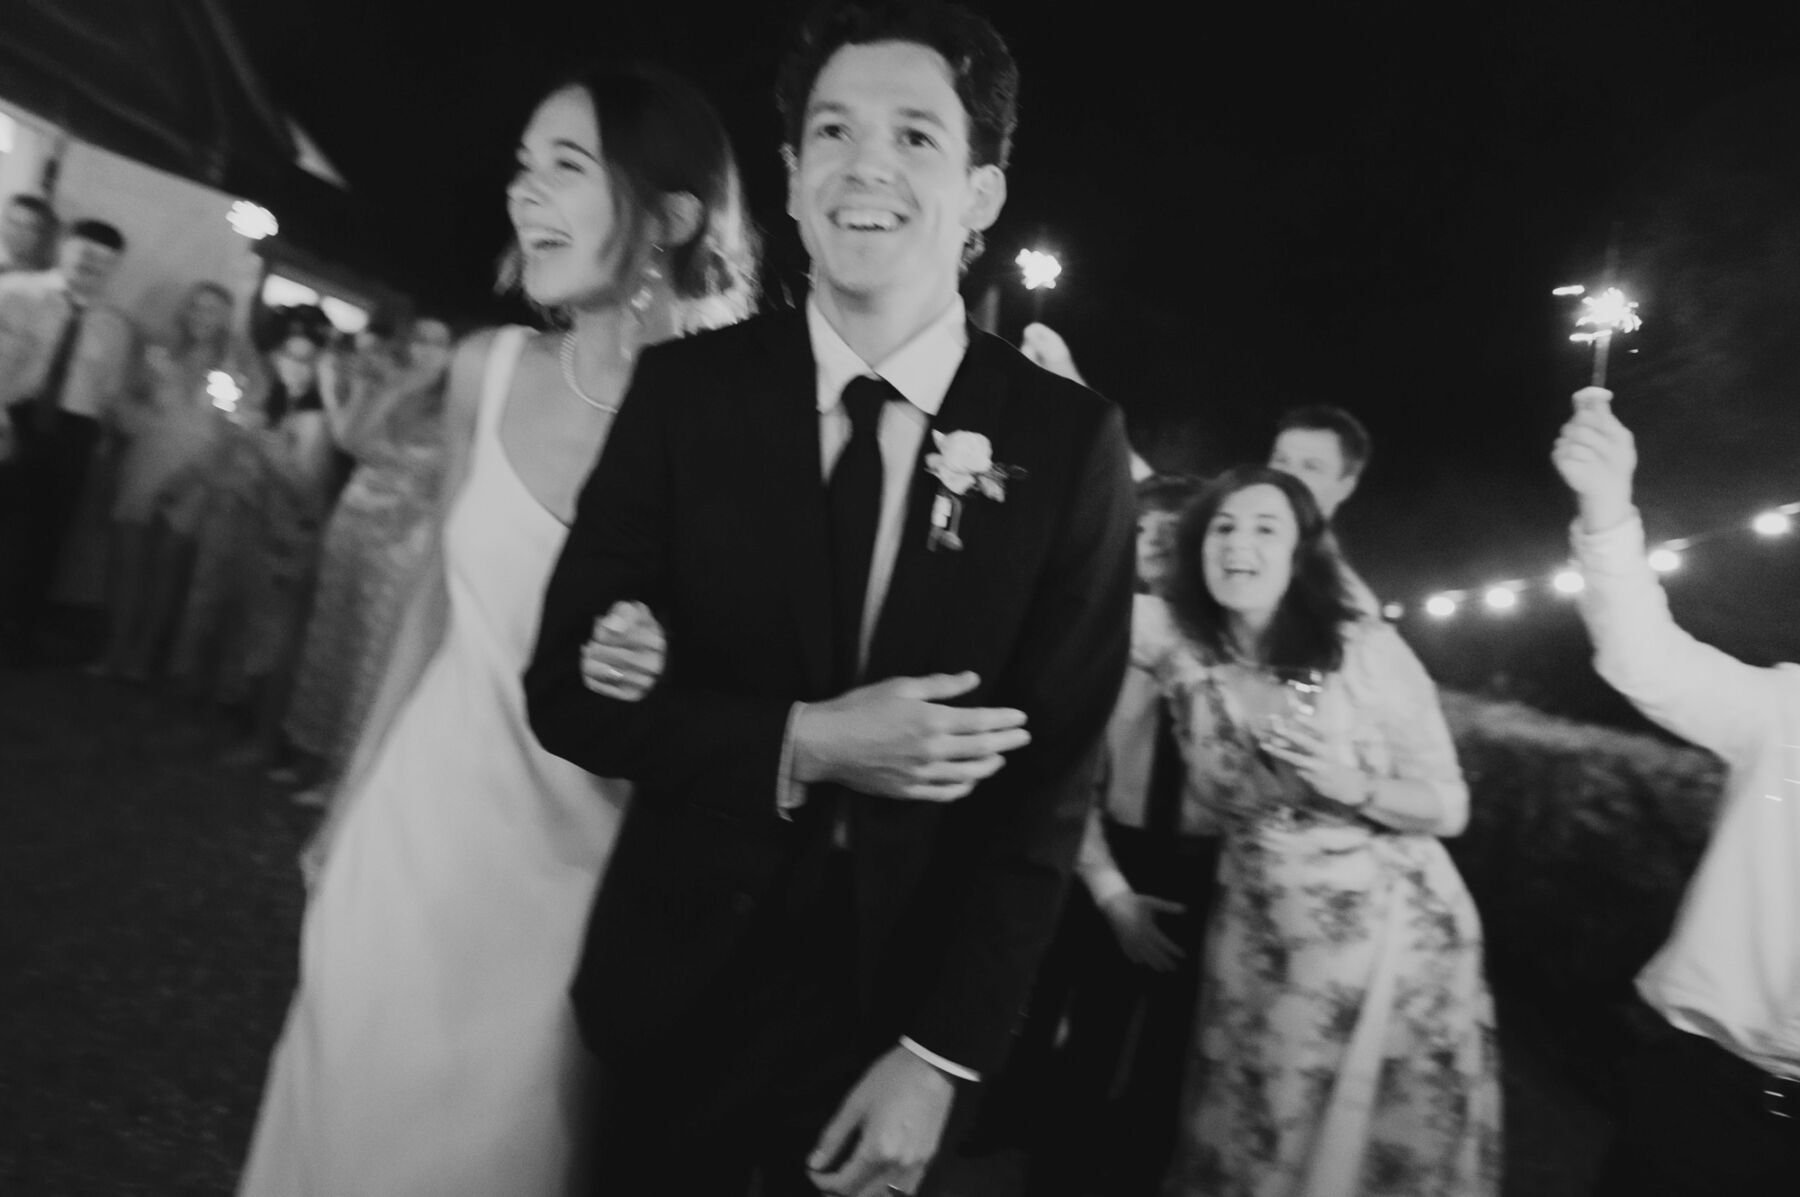 Black and white photography of bride and groom arm in arm surrounded by guests with wedding sparklers.